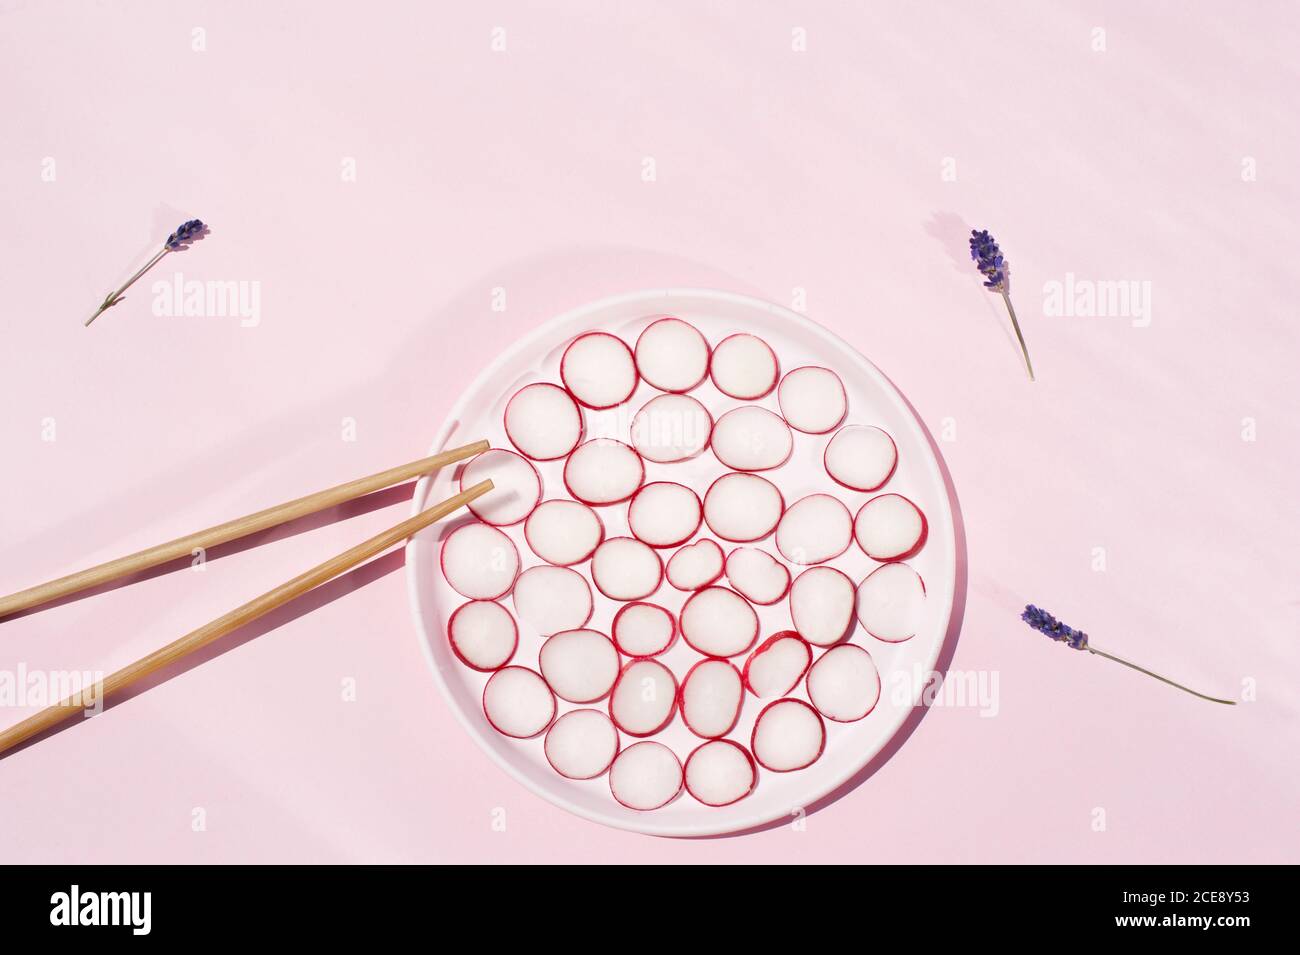 Top view of circles of fresh radish placed on plate with wooden chopsticks and lavender flowers Stock Photo